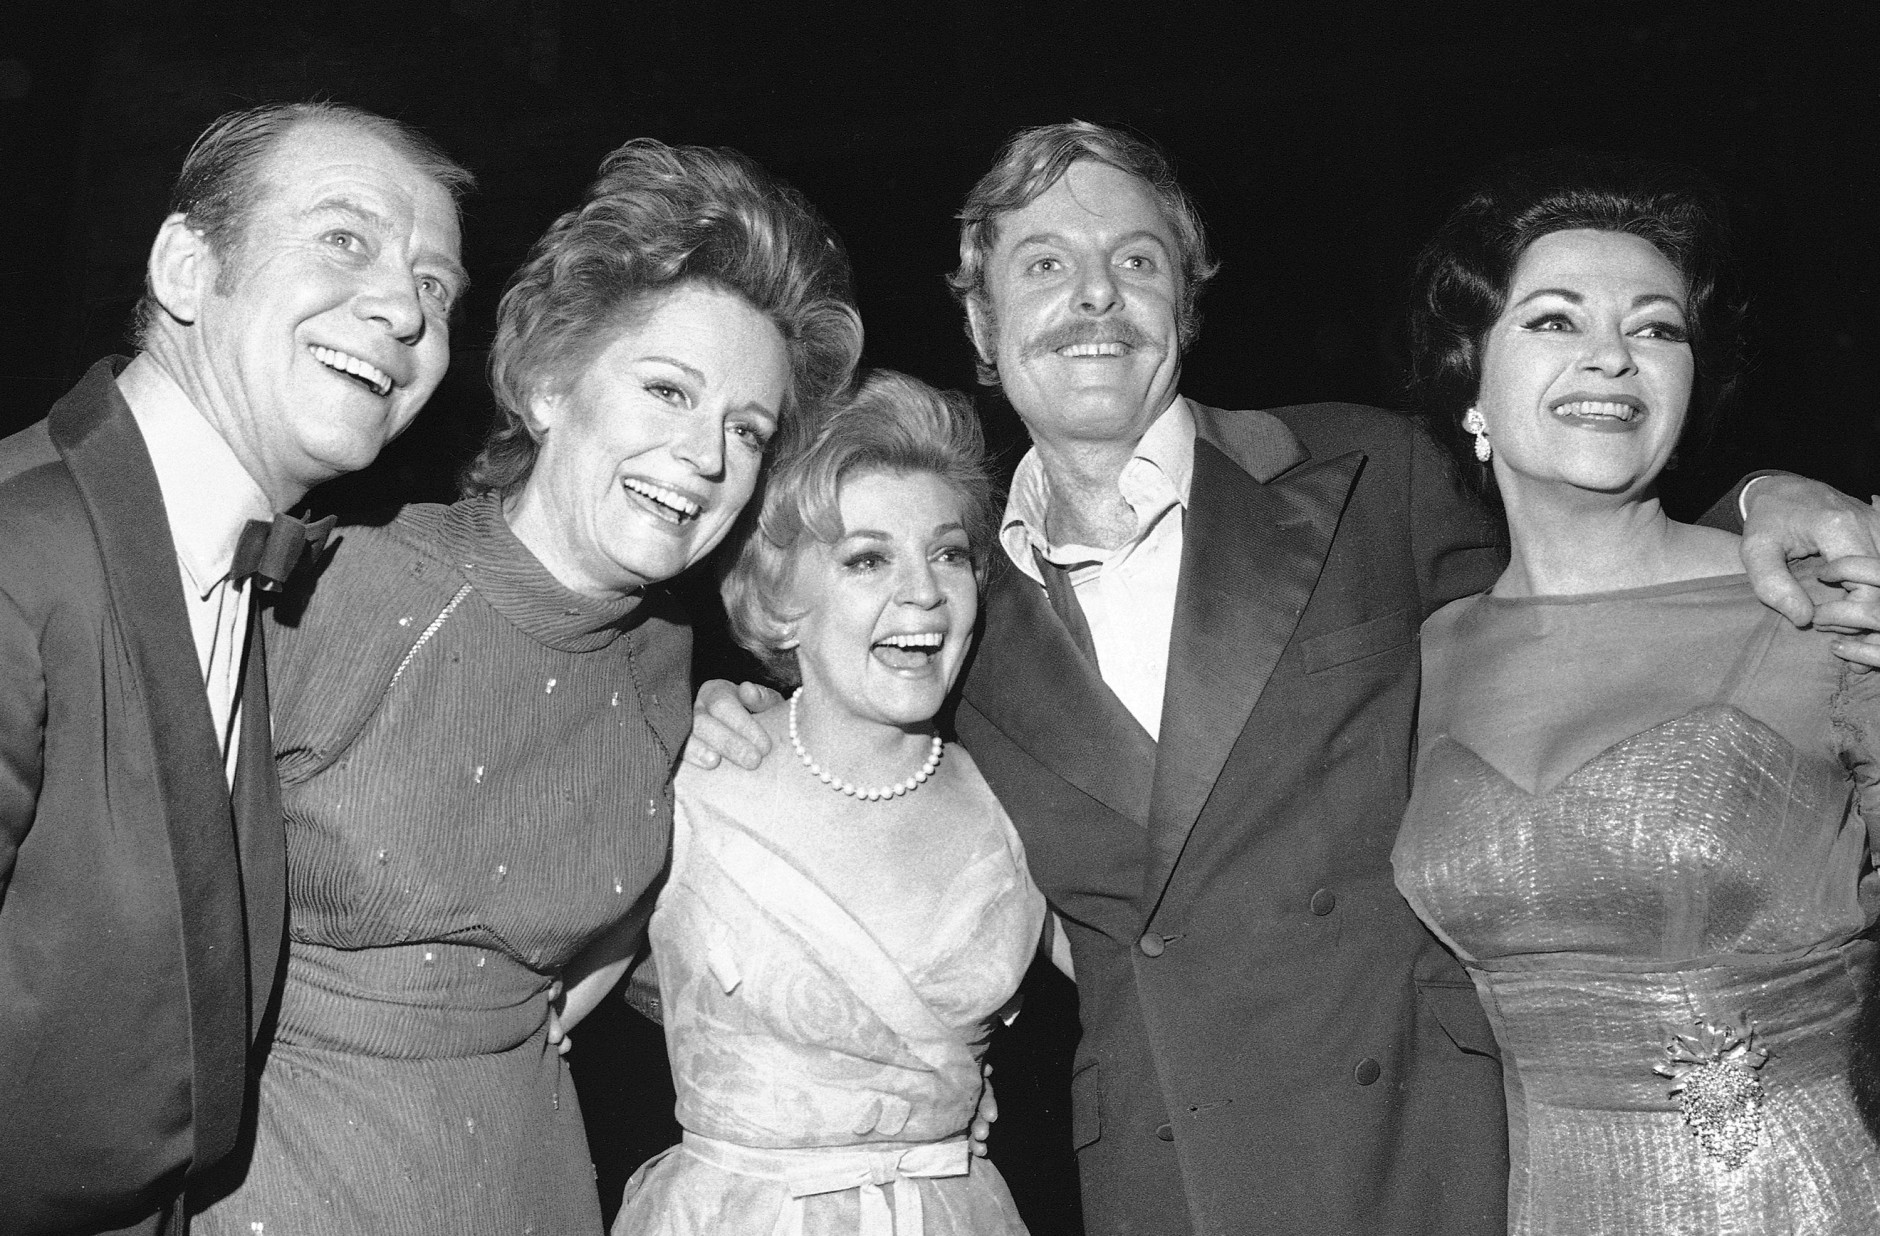 FILE - In this April 4, 1971 file photo, stars of the show "Follies," from left, Gene Nelson, Alexis Smith, Dorothy Collins, John McMartin, and Yvonne DeCarlo pose in New York. McMartin, the silver-haired, Tony Award-nominated actor whose Broadway career spanned decades, died of cancer, Wednesday, July 6, 2016, in New York. He was 86. (AP Photo/Ron Frehm, File)